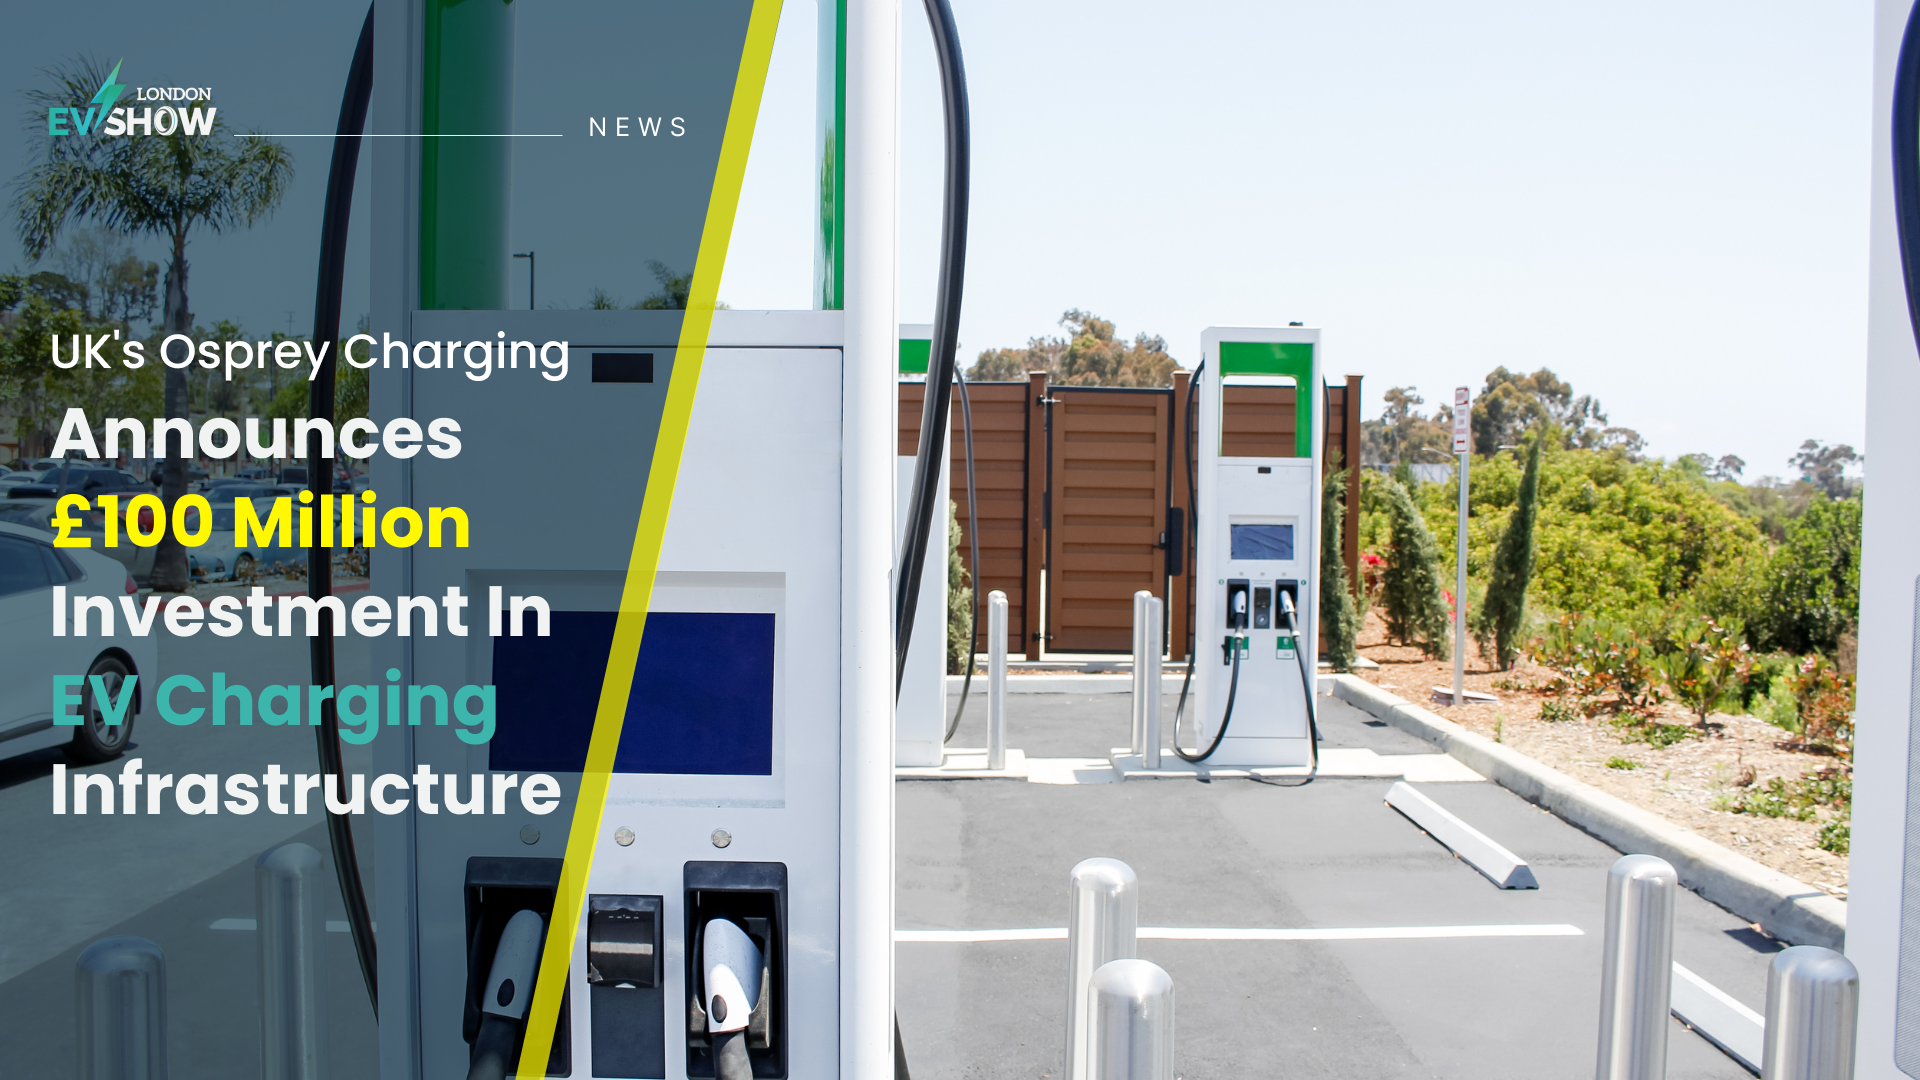 UK's Osprey Charging Announces £100 Million Investment In EV Charging Infrastructure